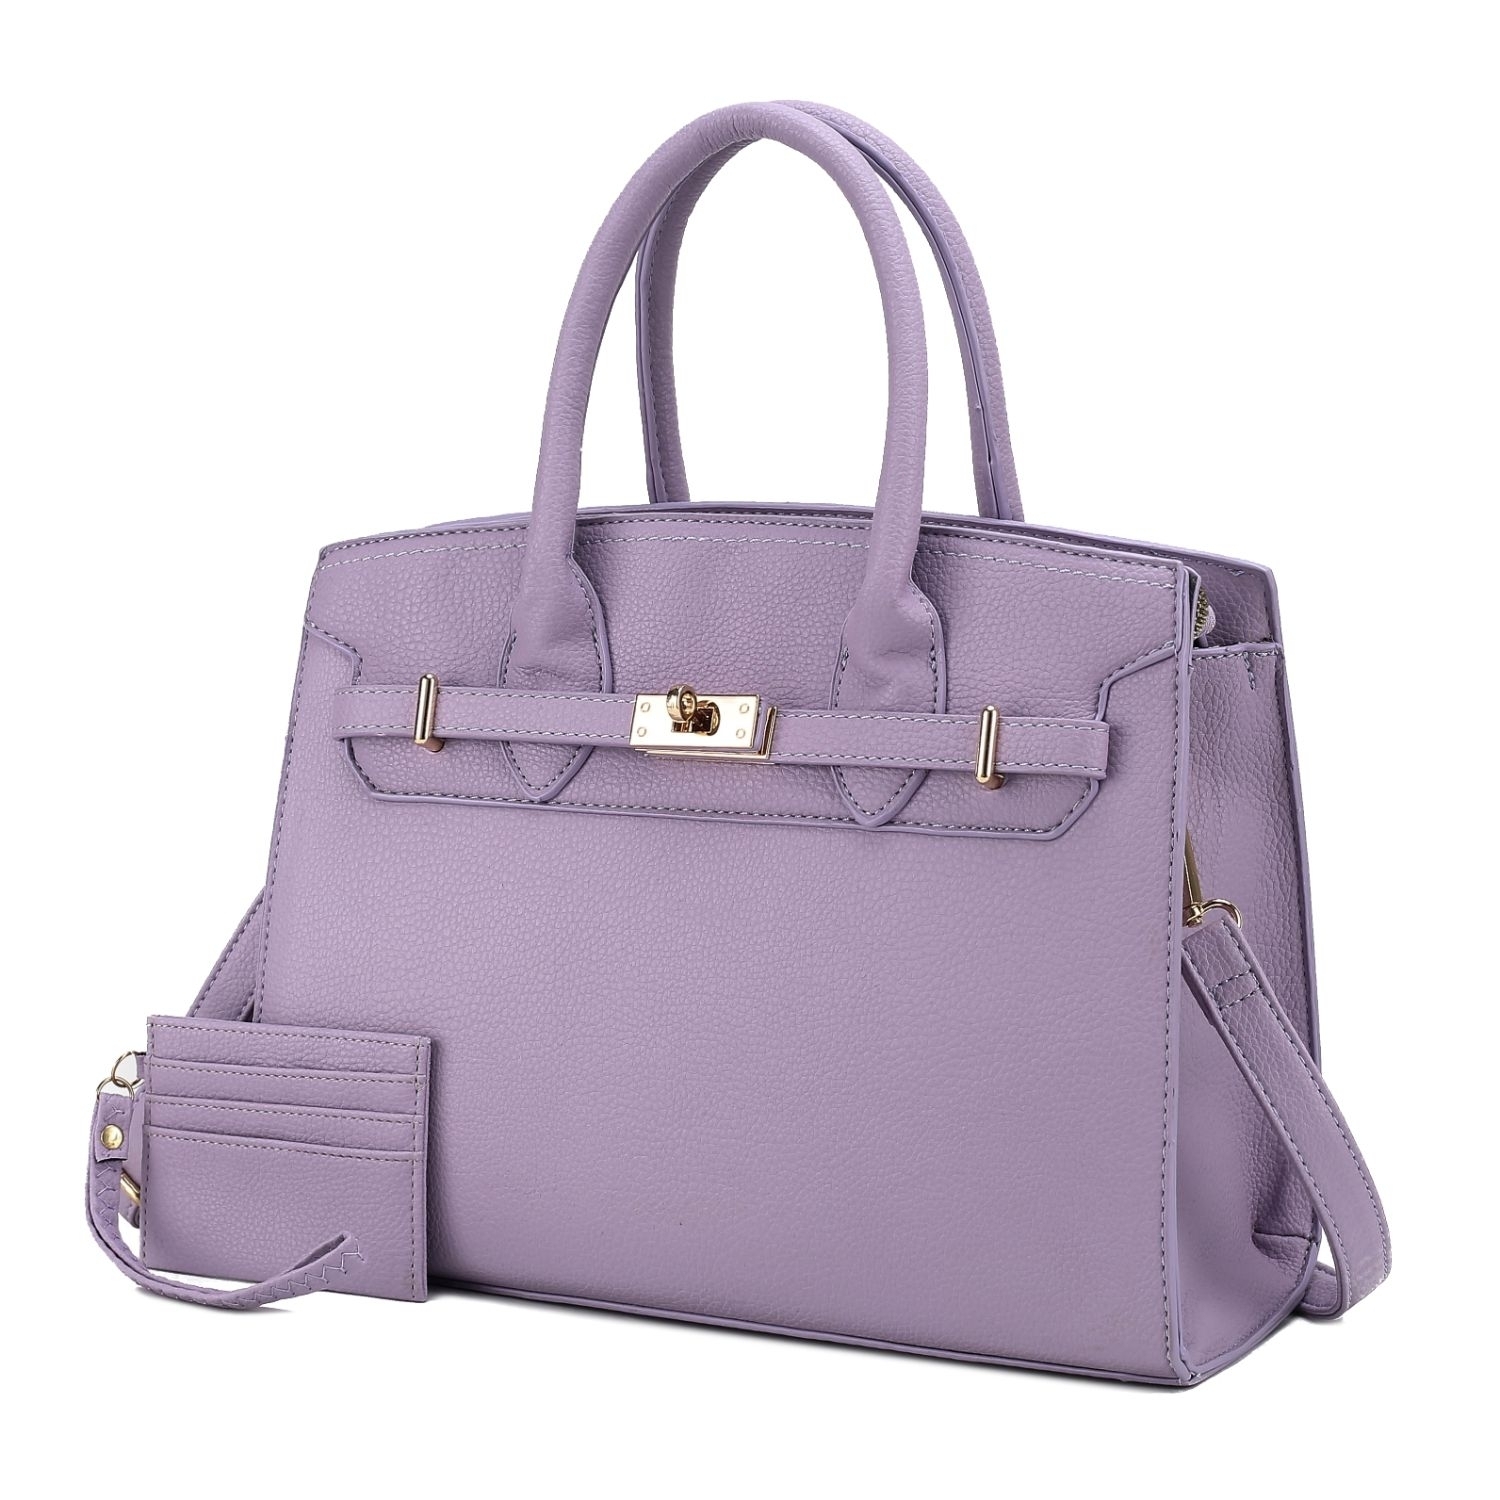 MKF Collection Calla Vegan Leather Women's Satchel Bag With Credit Card Holder-2 Pieces By Mia K - Lilac